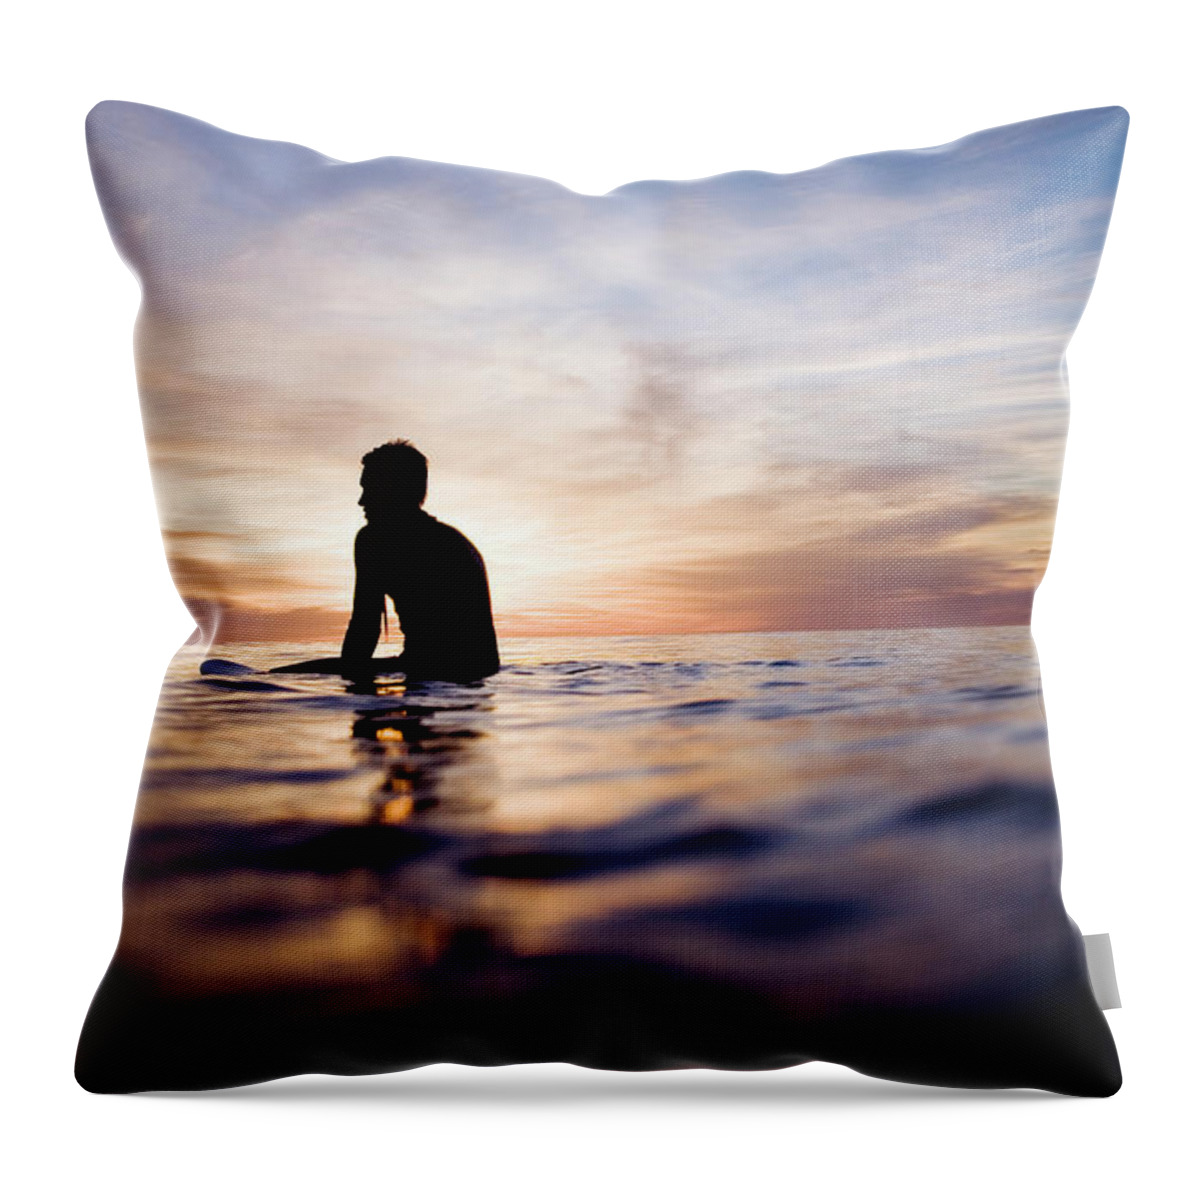 People Throw Pillow featuring the photograph A Lone Surfer In The Sunset #2 by Jay Reilly